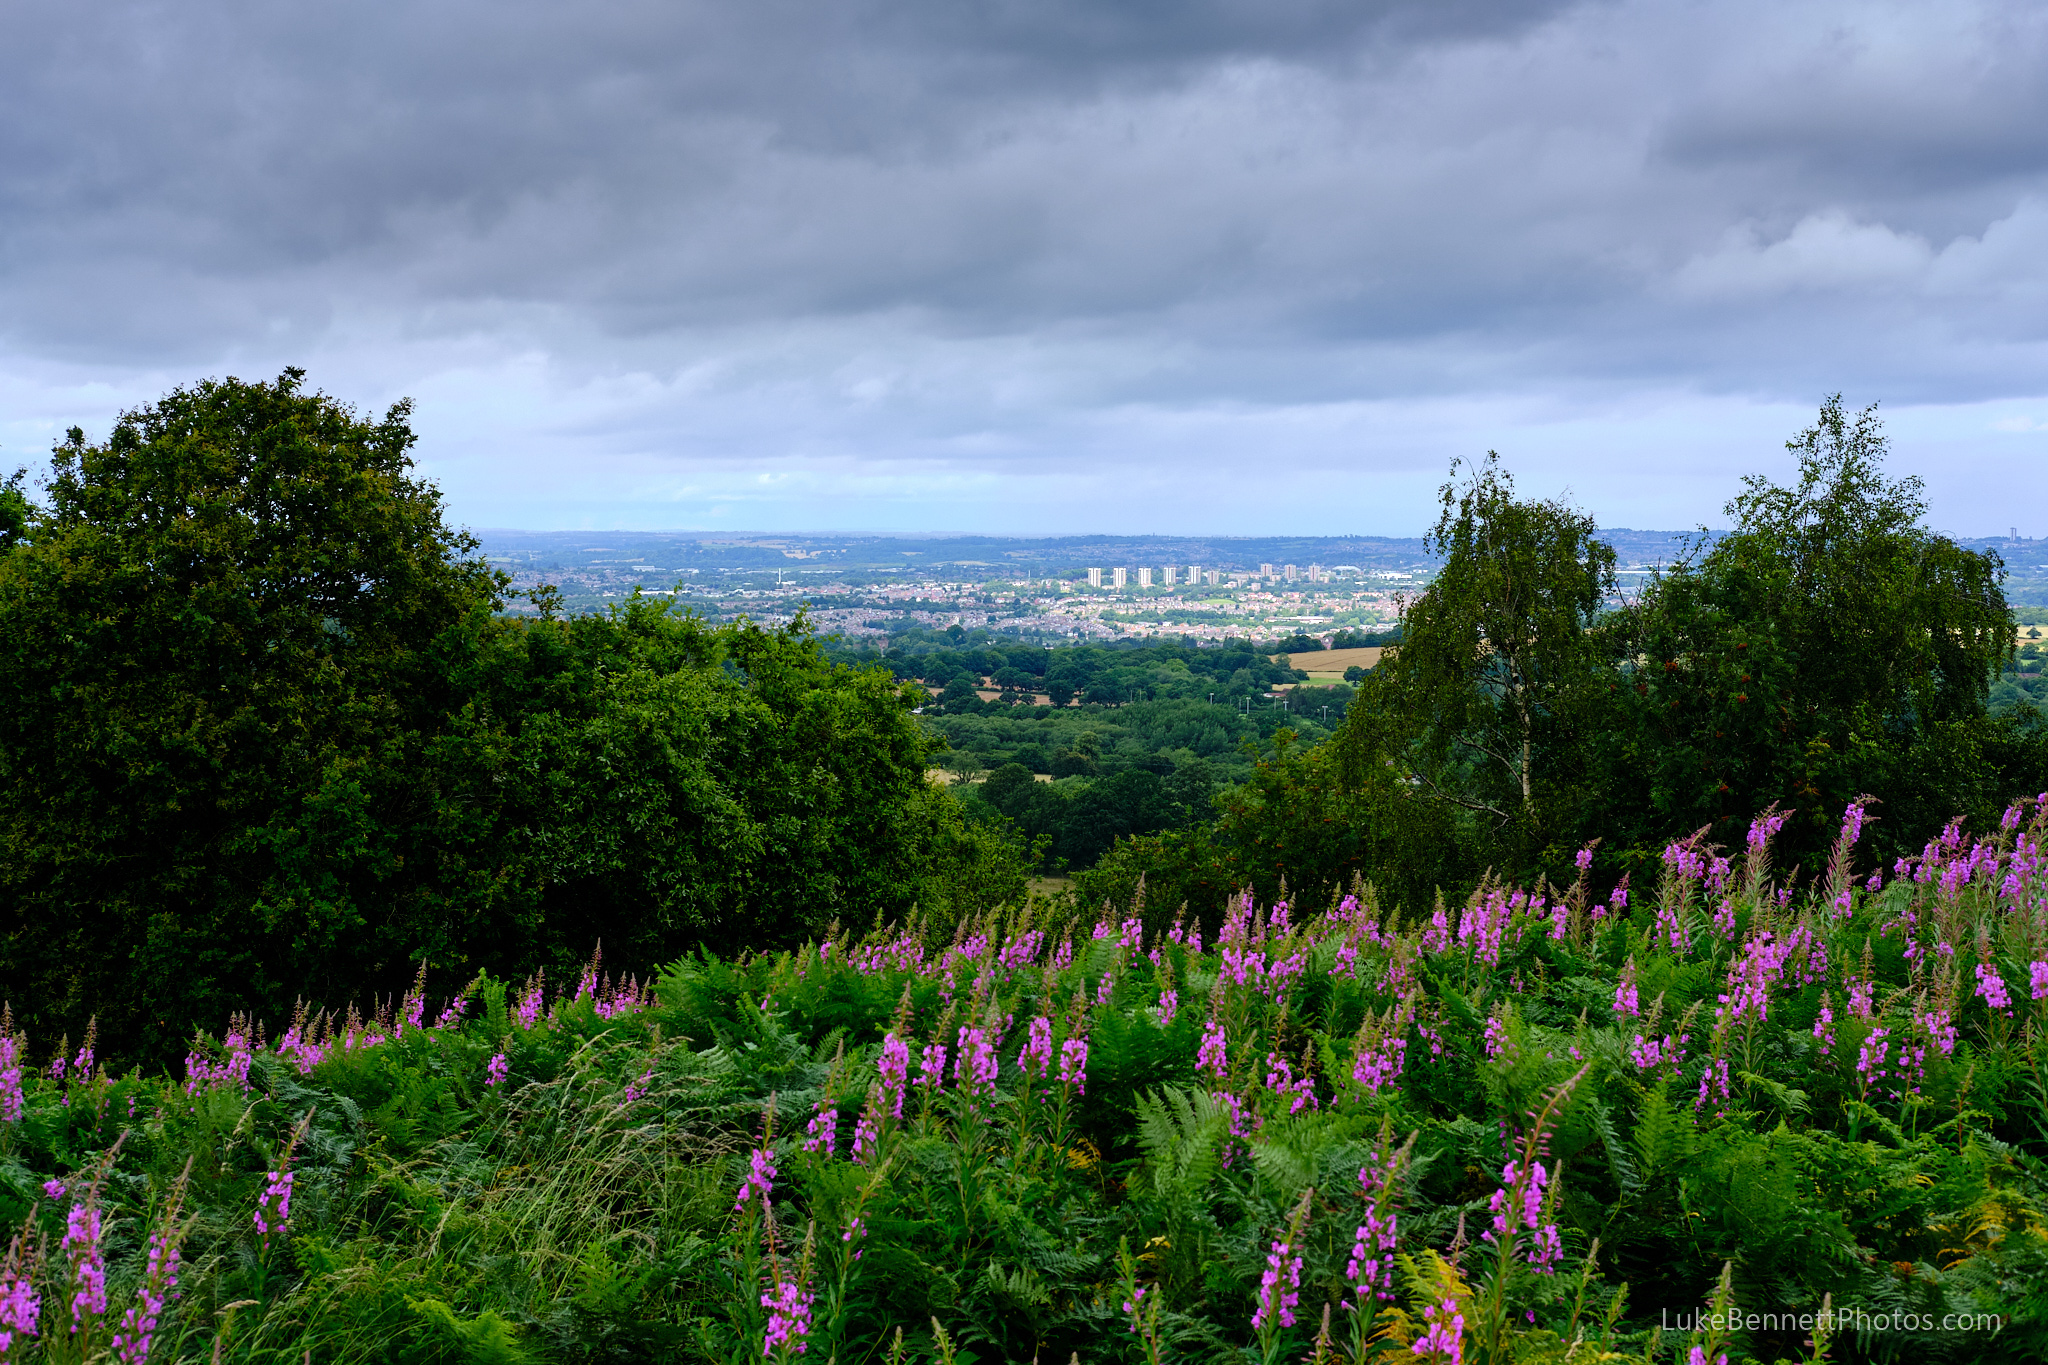 The view of Stourbridge from the Clent Hills